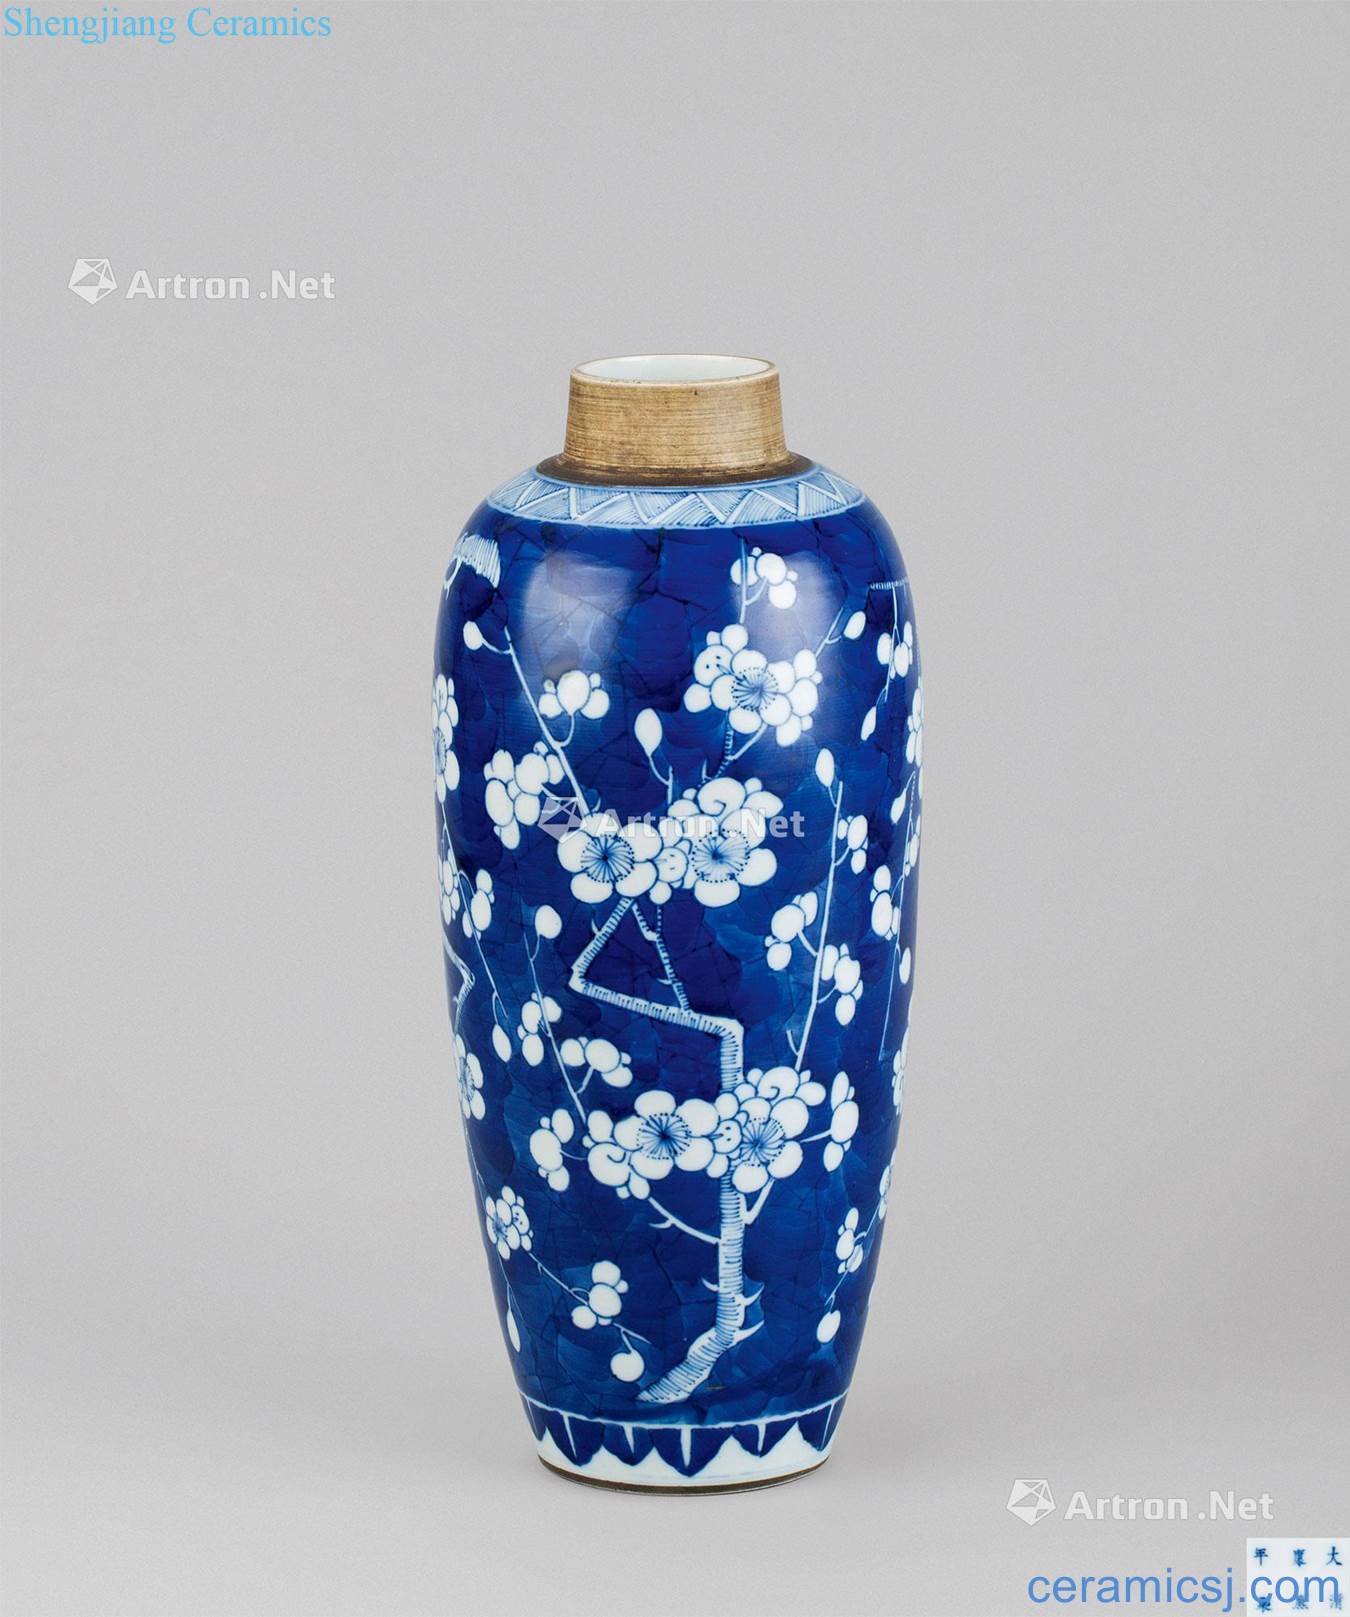 In the qing dynasty (1644-1911) blue and white plum flower pattern vase